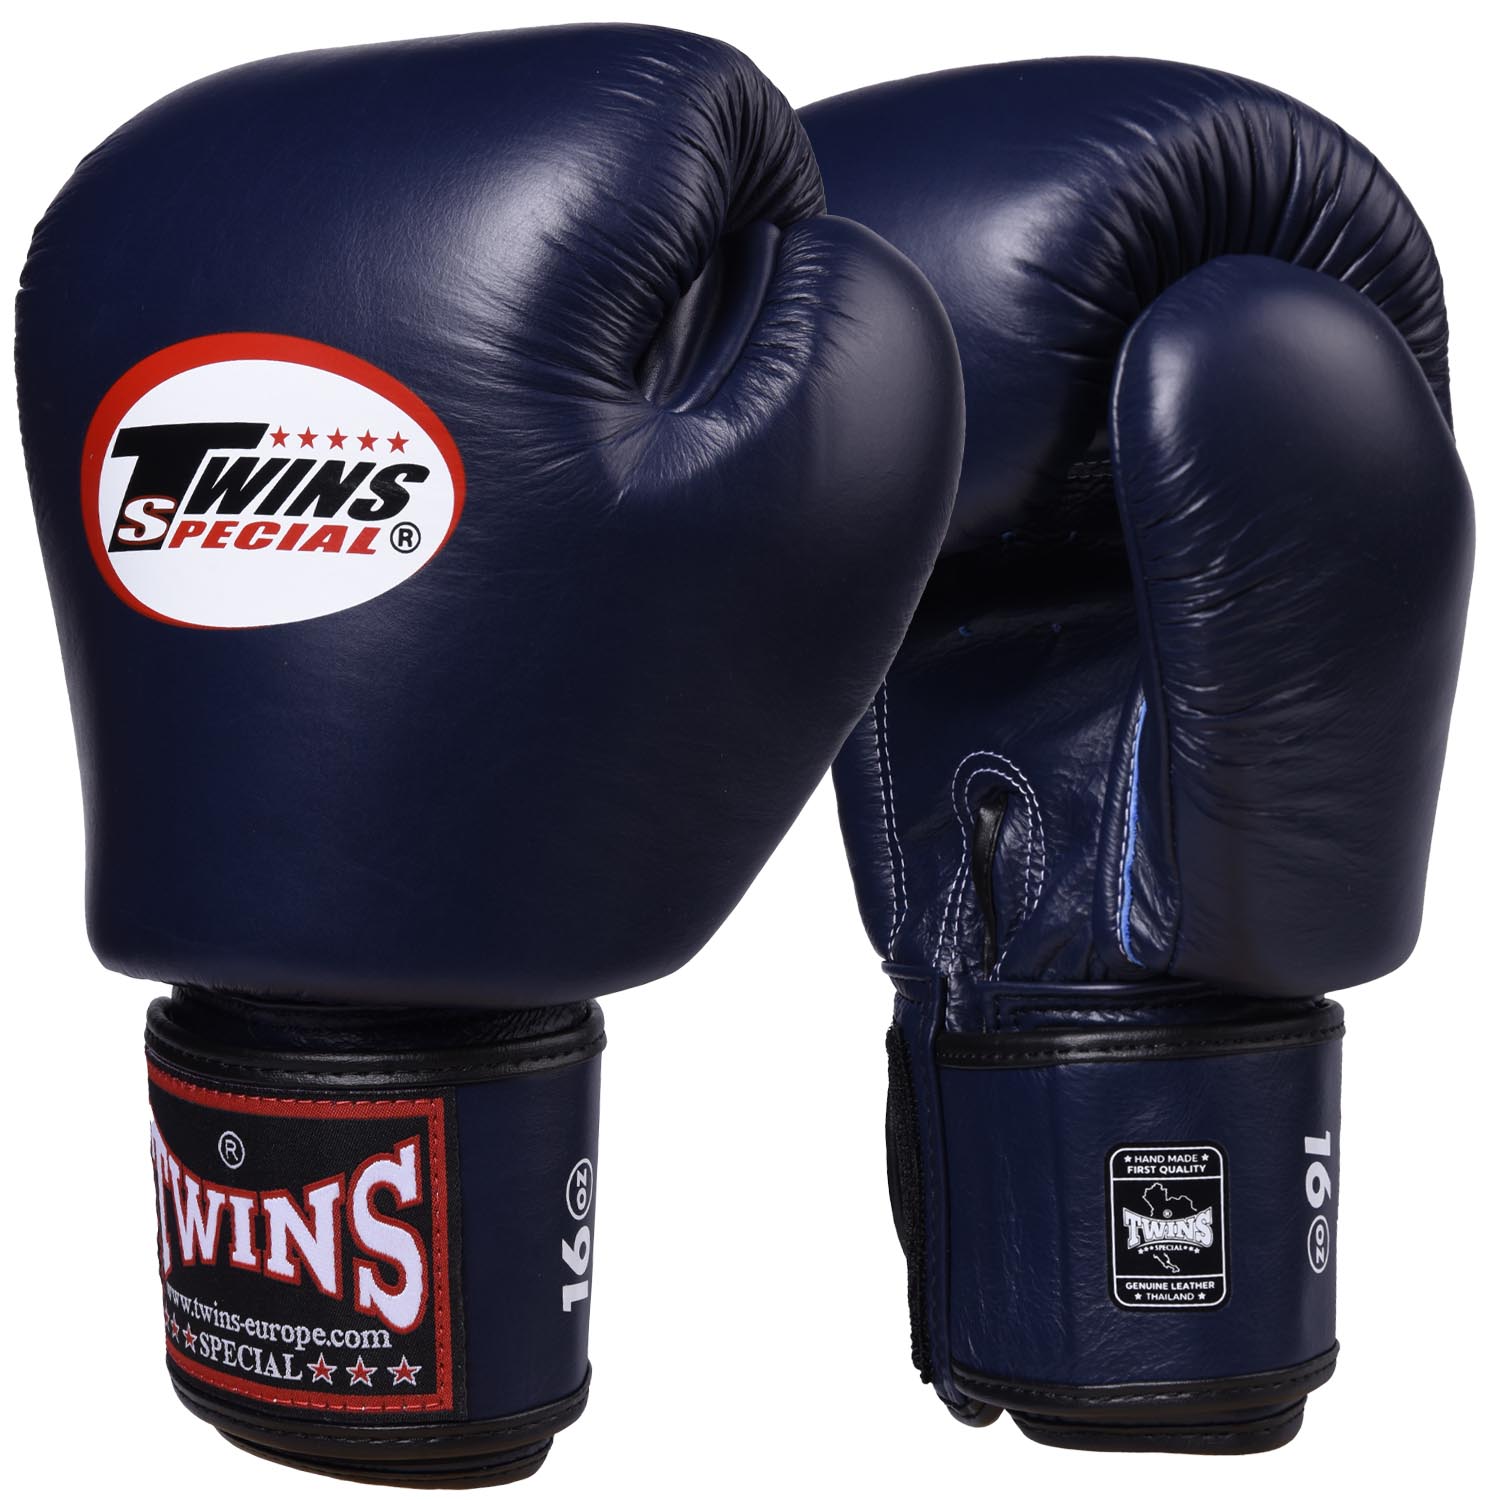 TWINS Special Boxing Gloves, Leather, BGVL-3, blue, 12 Oz